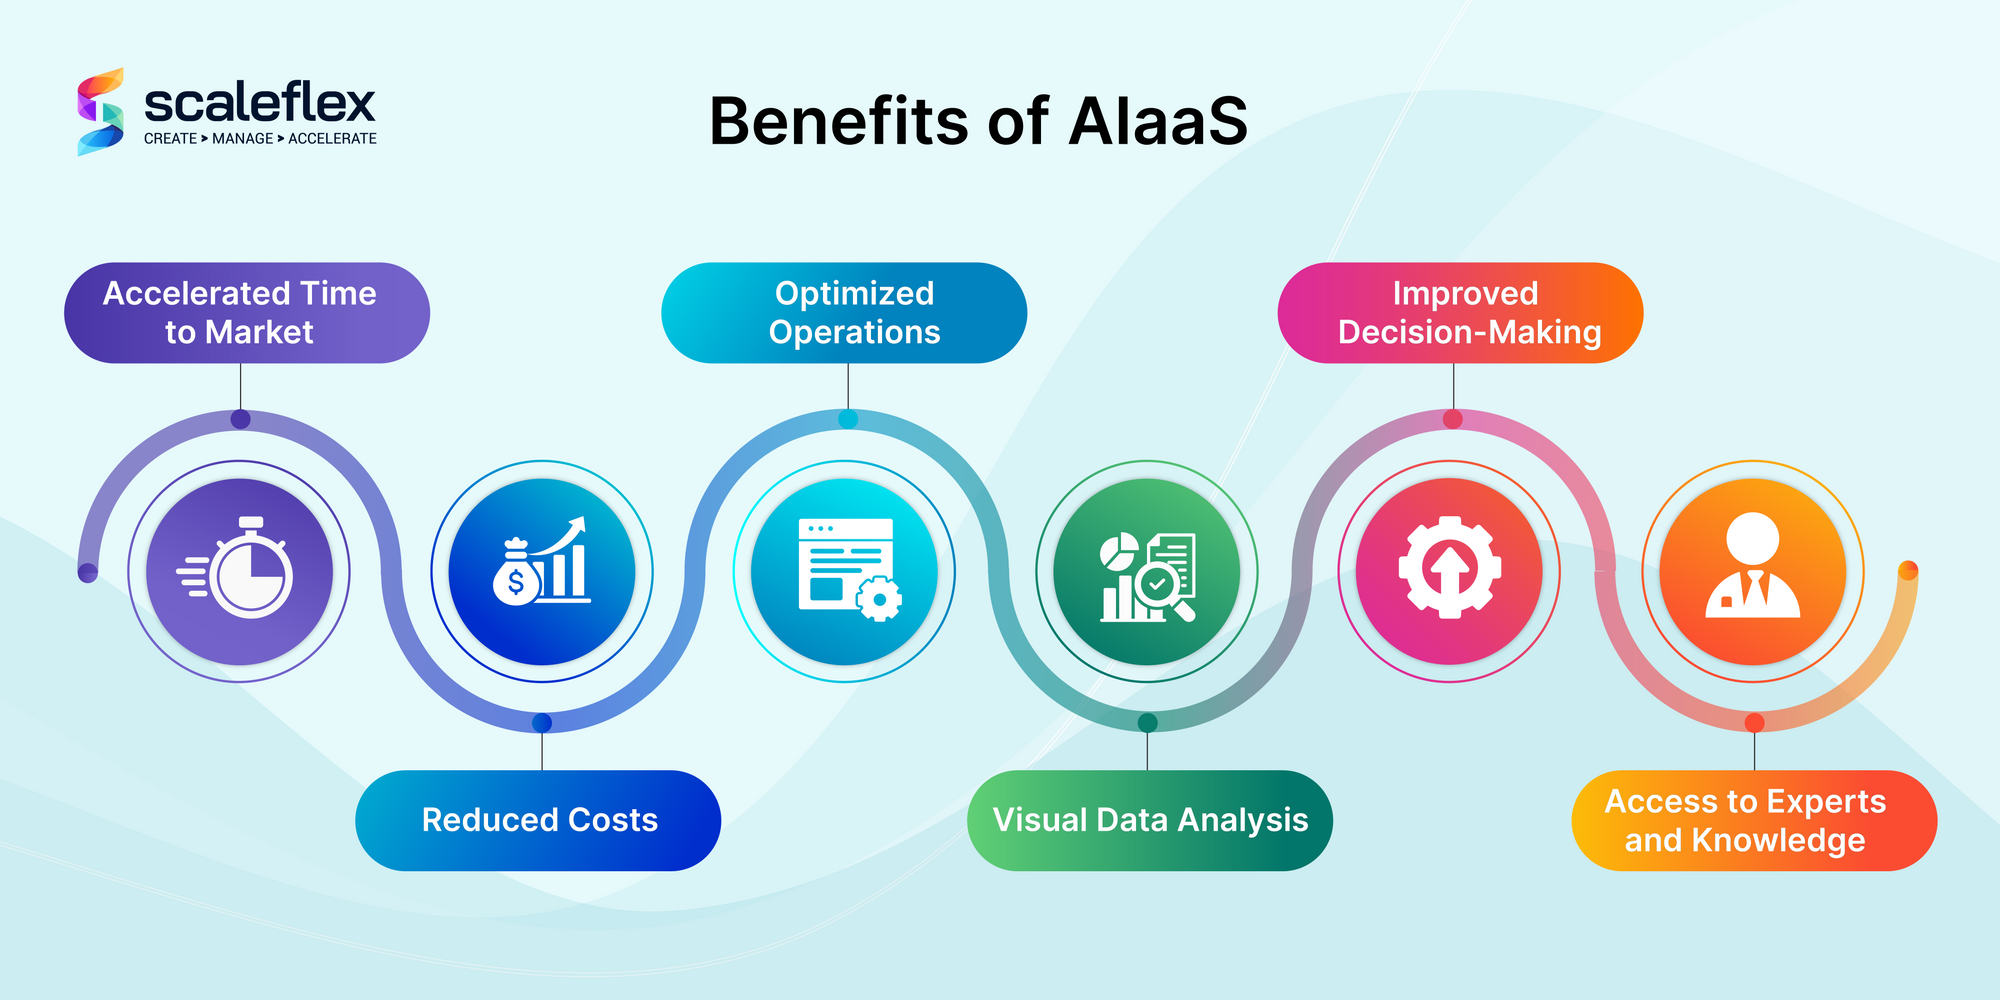 benefits of aiaas